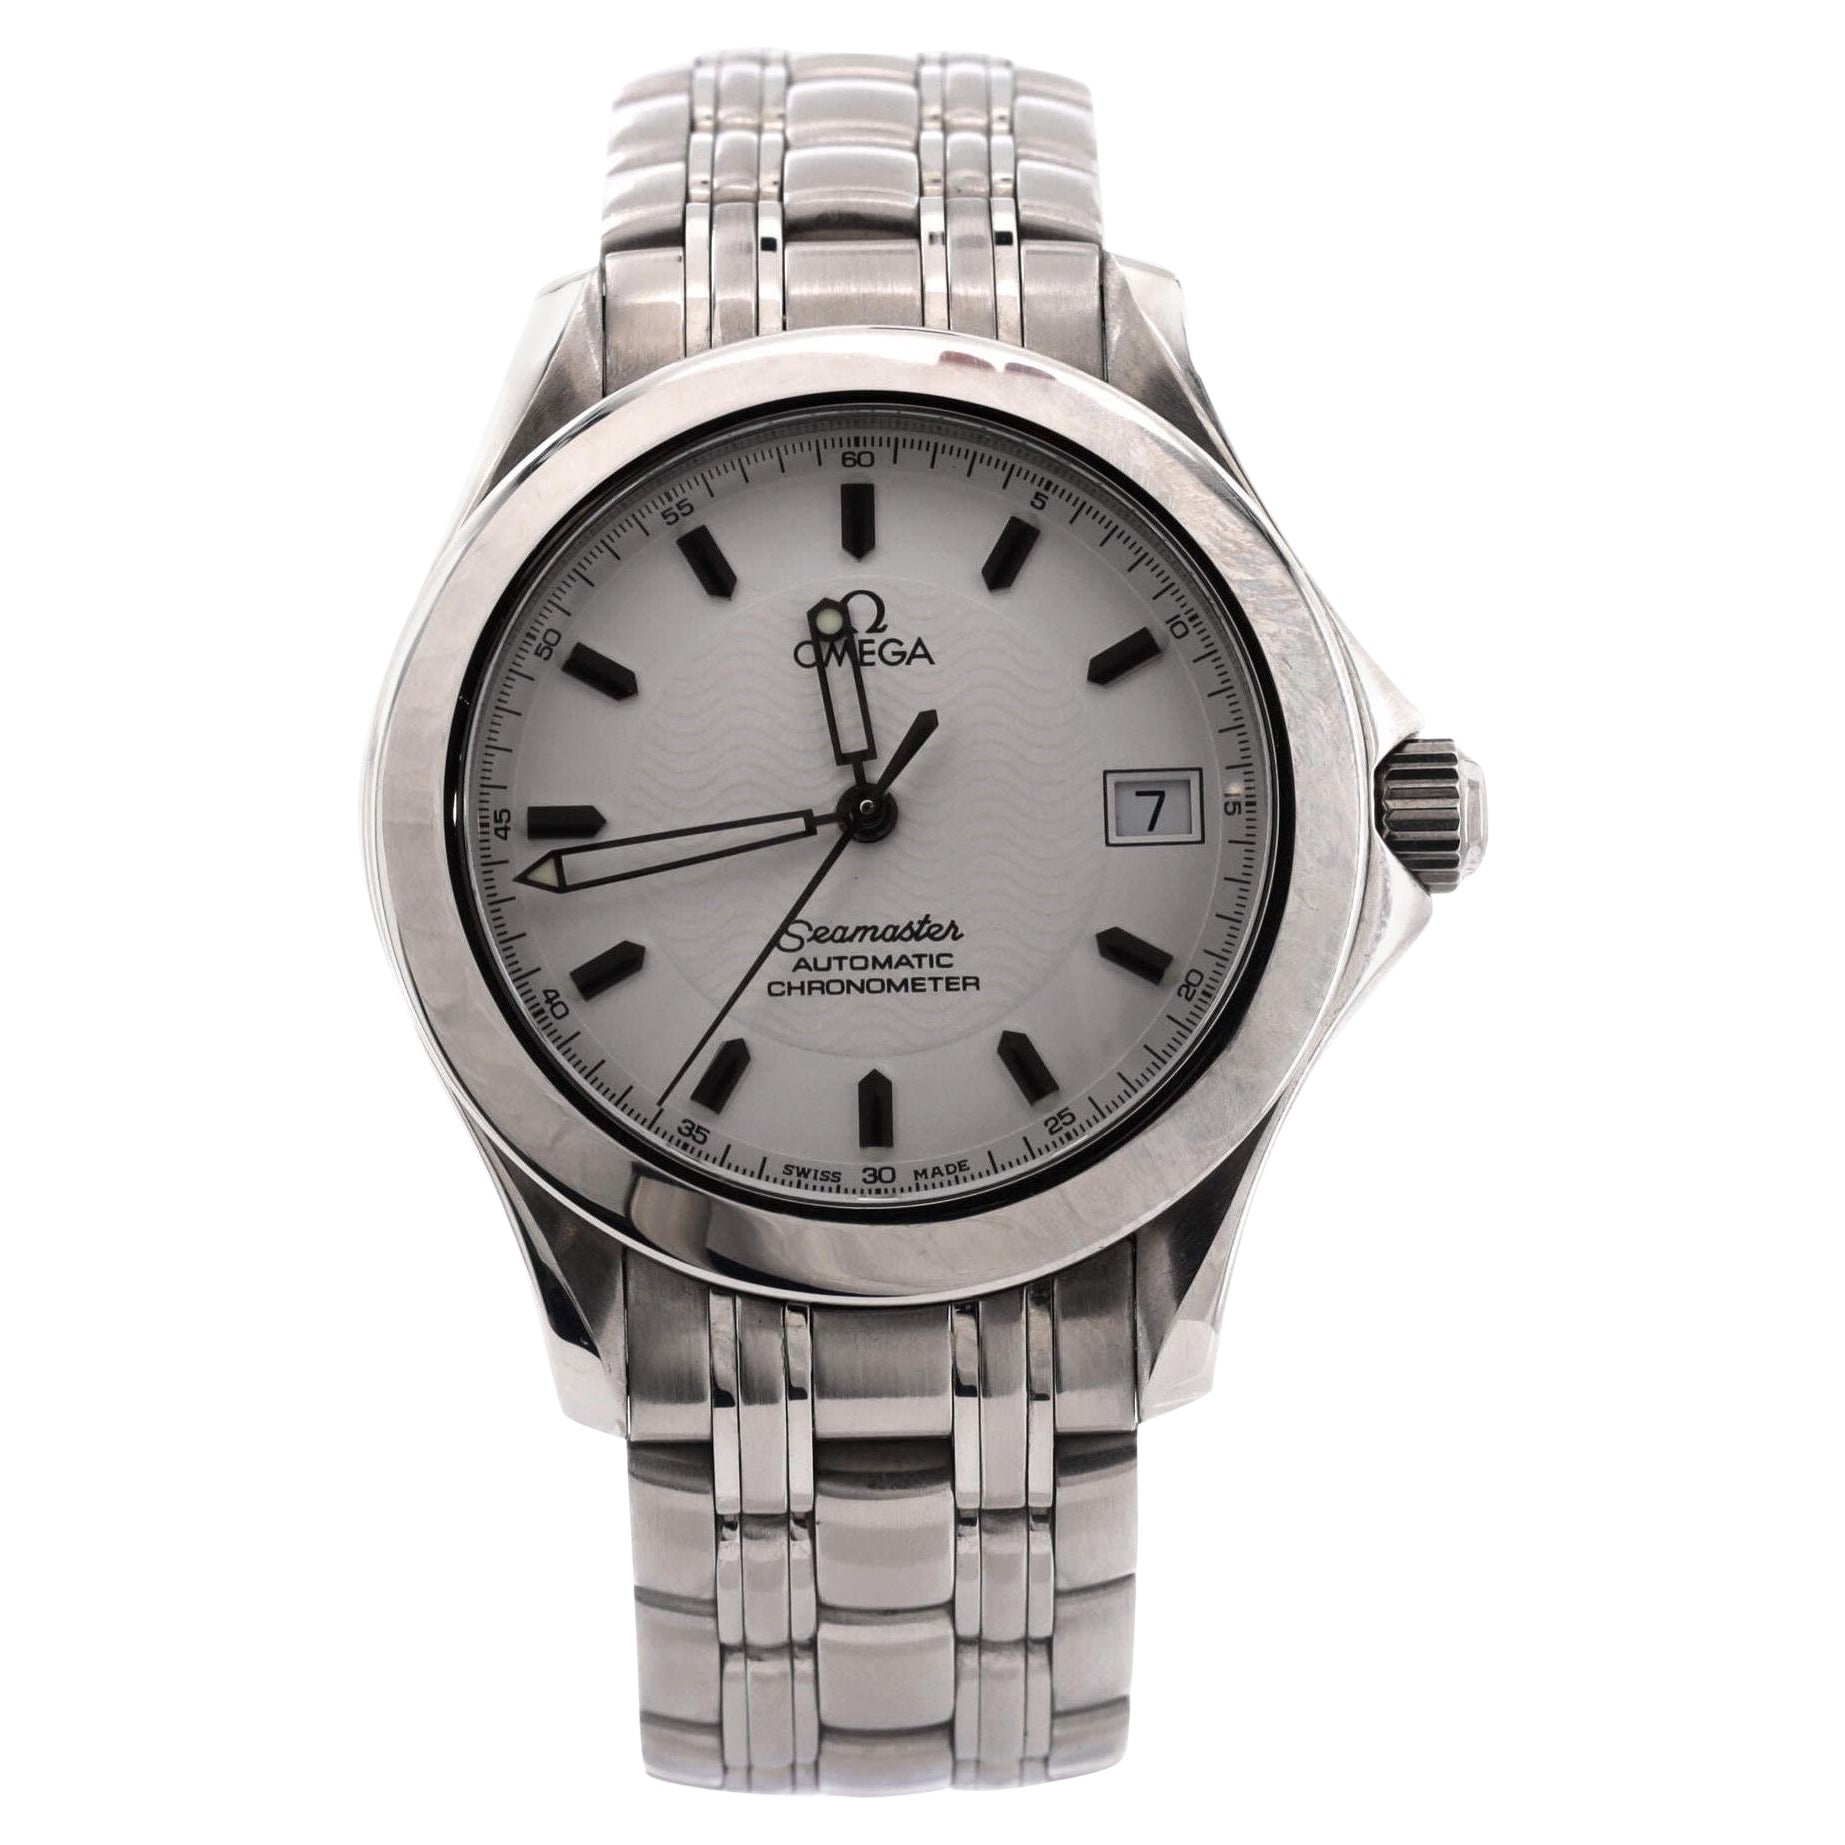 Omega Seamaster 120M Chronometer Automatic Watch Stainless Steel 36